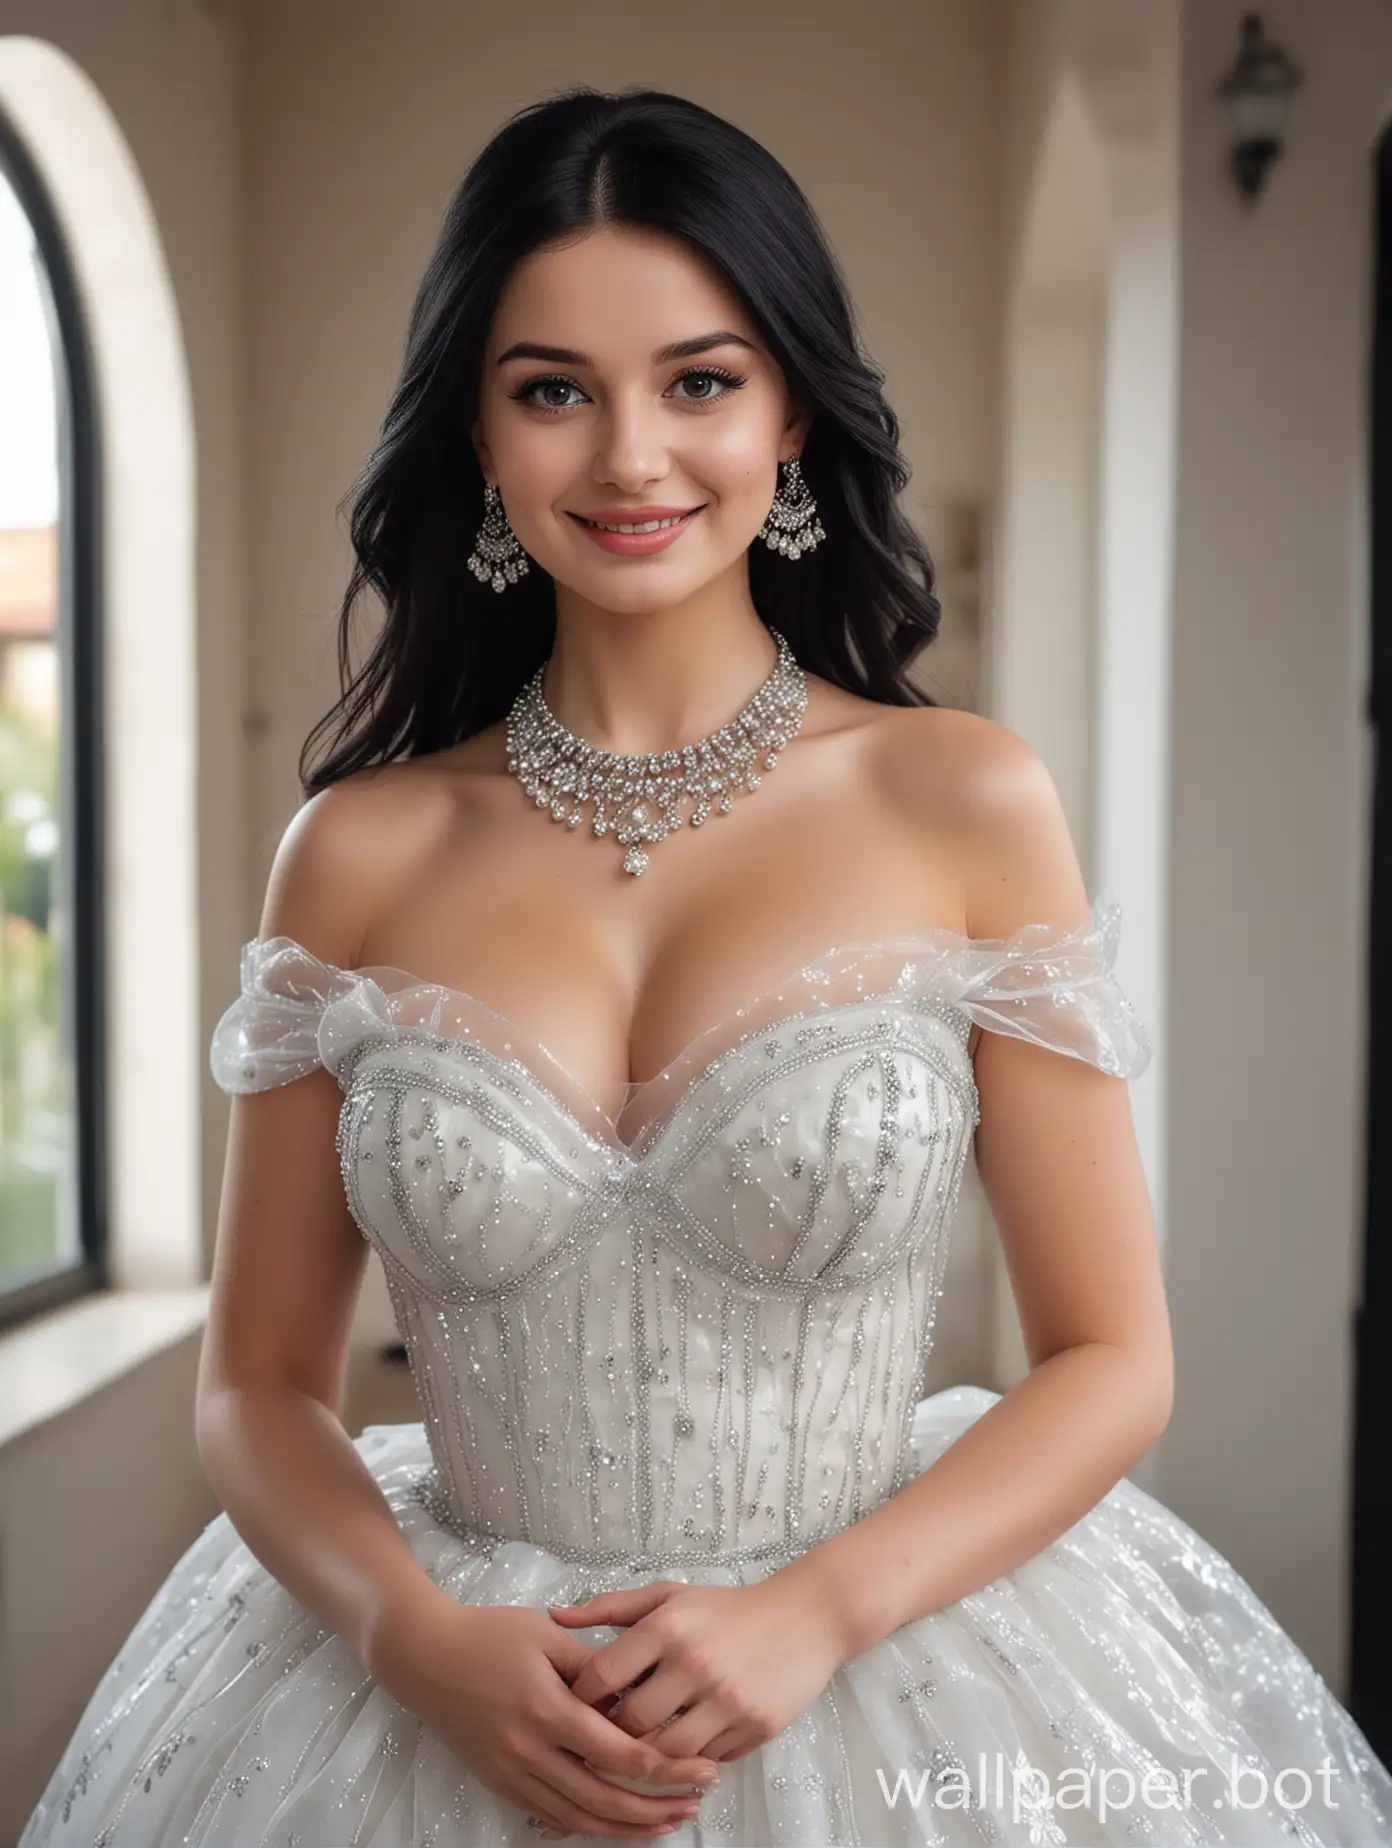 Generate an image of most beautiful  Czech Republic  actress cute pretty girl big tits , wearing  Ball Gown dress Transparent  ,  with a fair white skin tone and long hair black. She has a round face smile . The background is a modern house interior. The camera shot captures her from head to stomach . She is wearing makeup and has a necklace , jhumka ear ring and bracelet on.